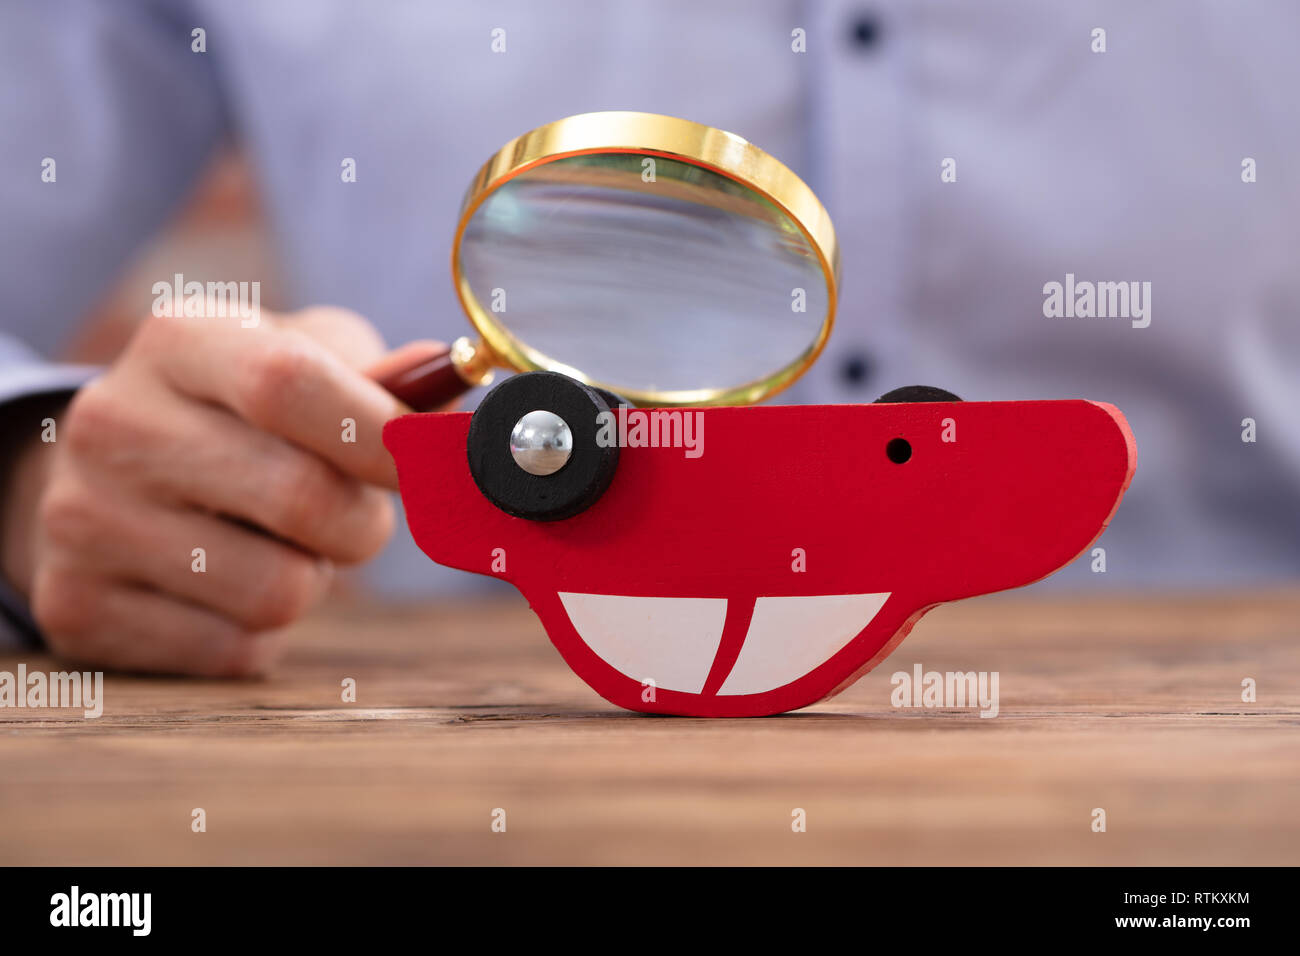 Person Scrutinizing A Car Model Using Magnifying Glass On Wooden Desk Stock Photo